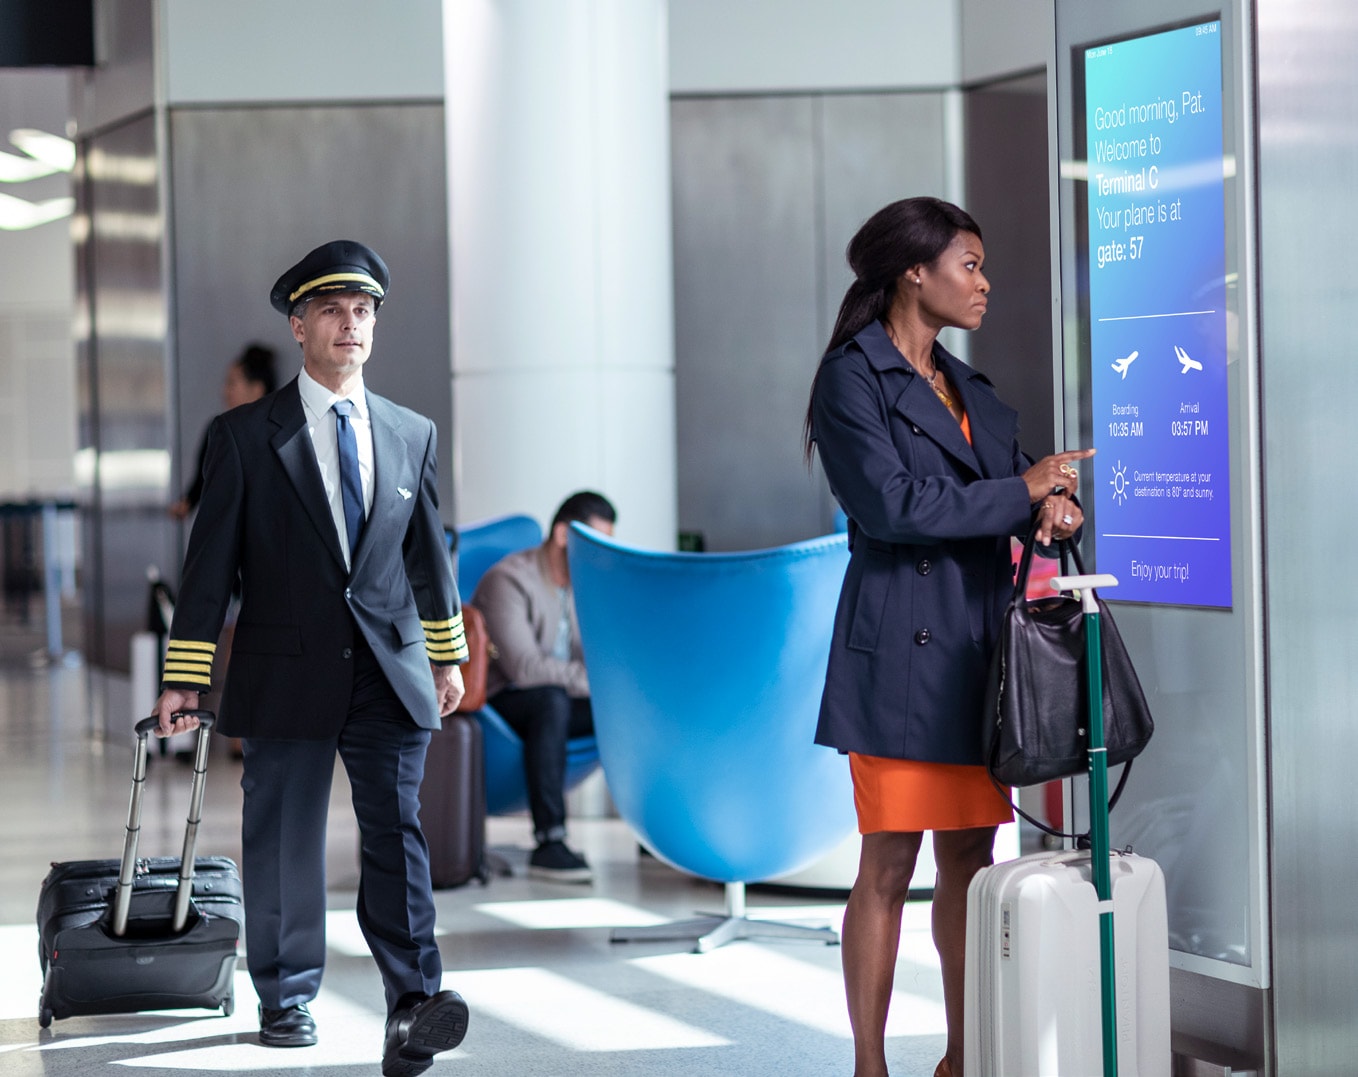 Business Travel Trends To Watch - SAP Concur